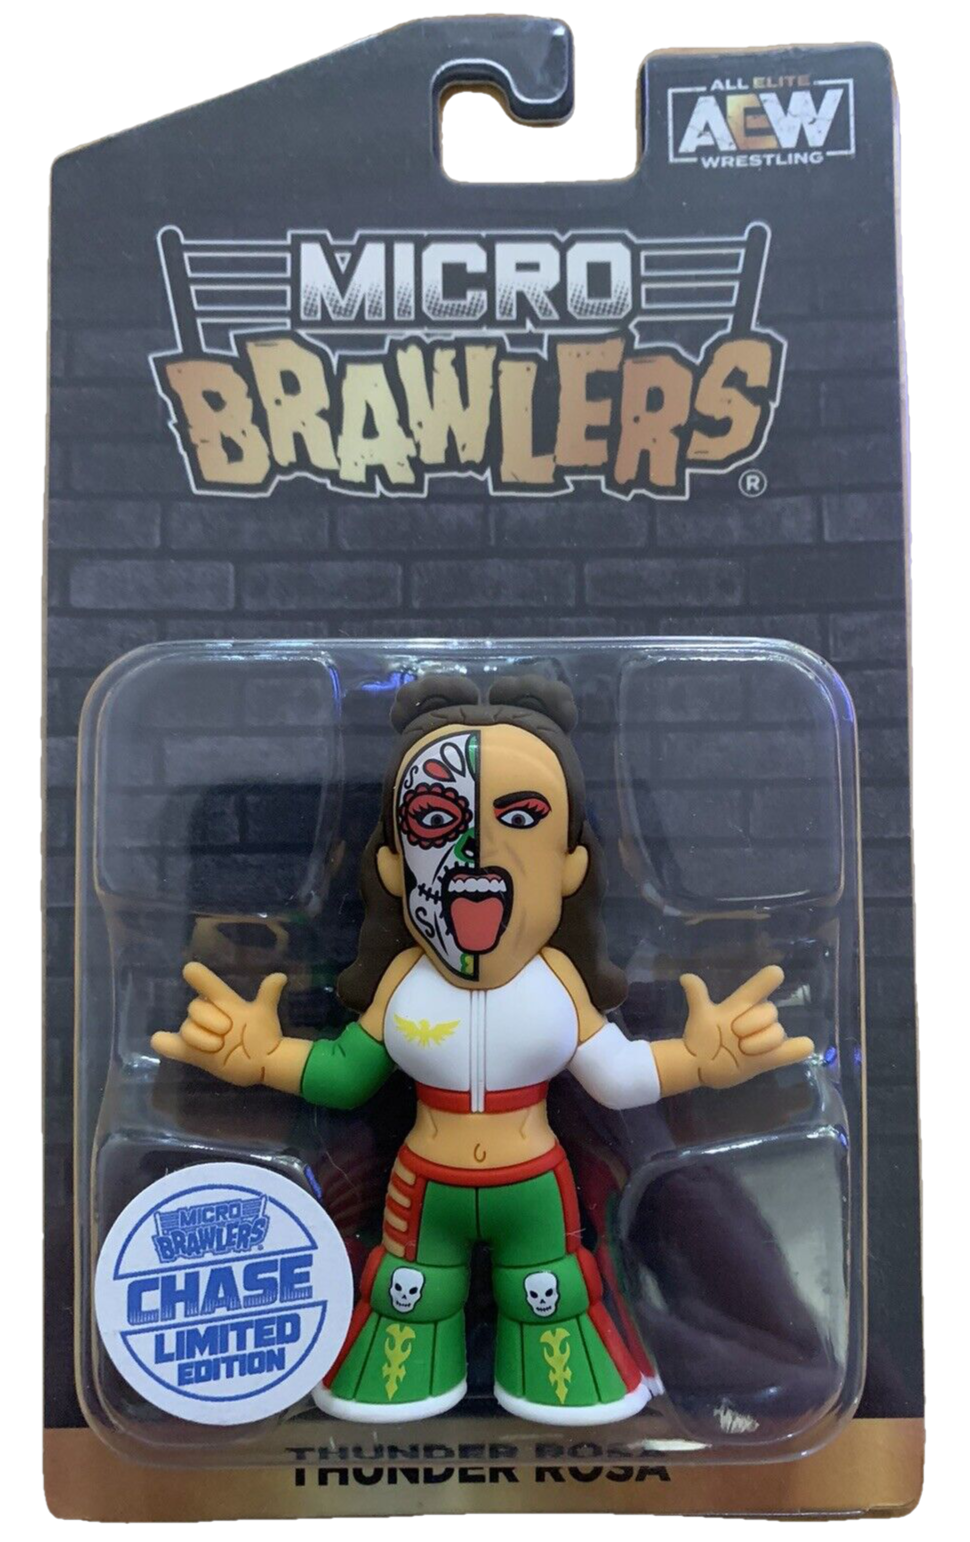 Unsigned Chase Micro brawler 2